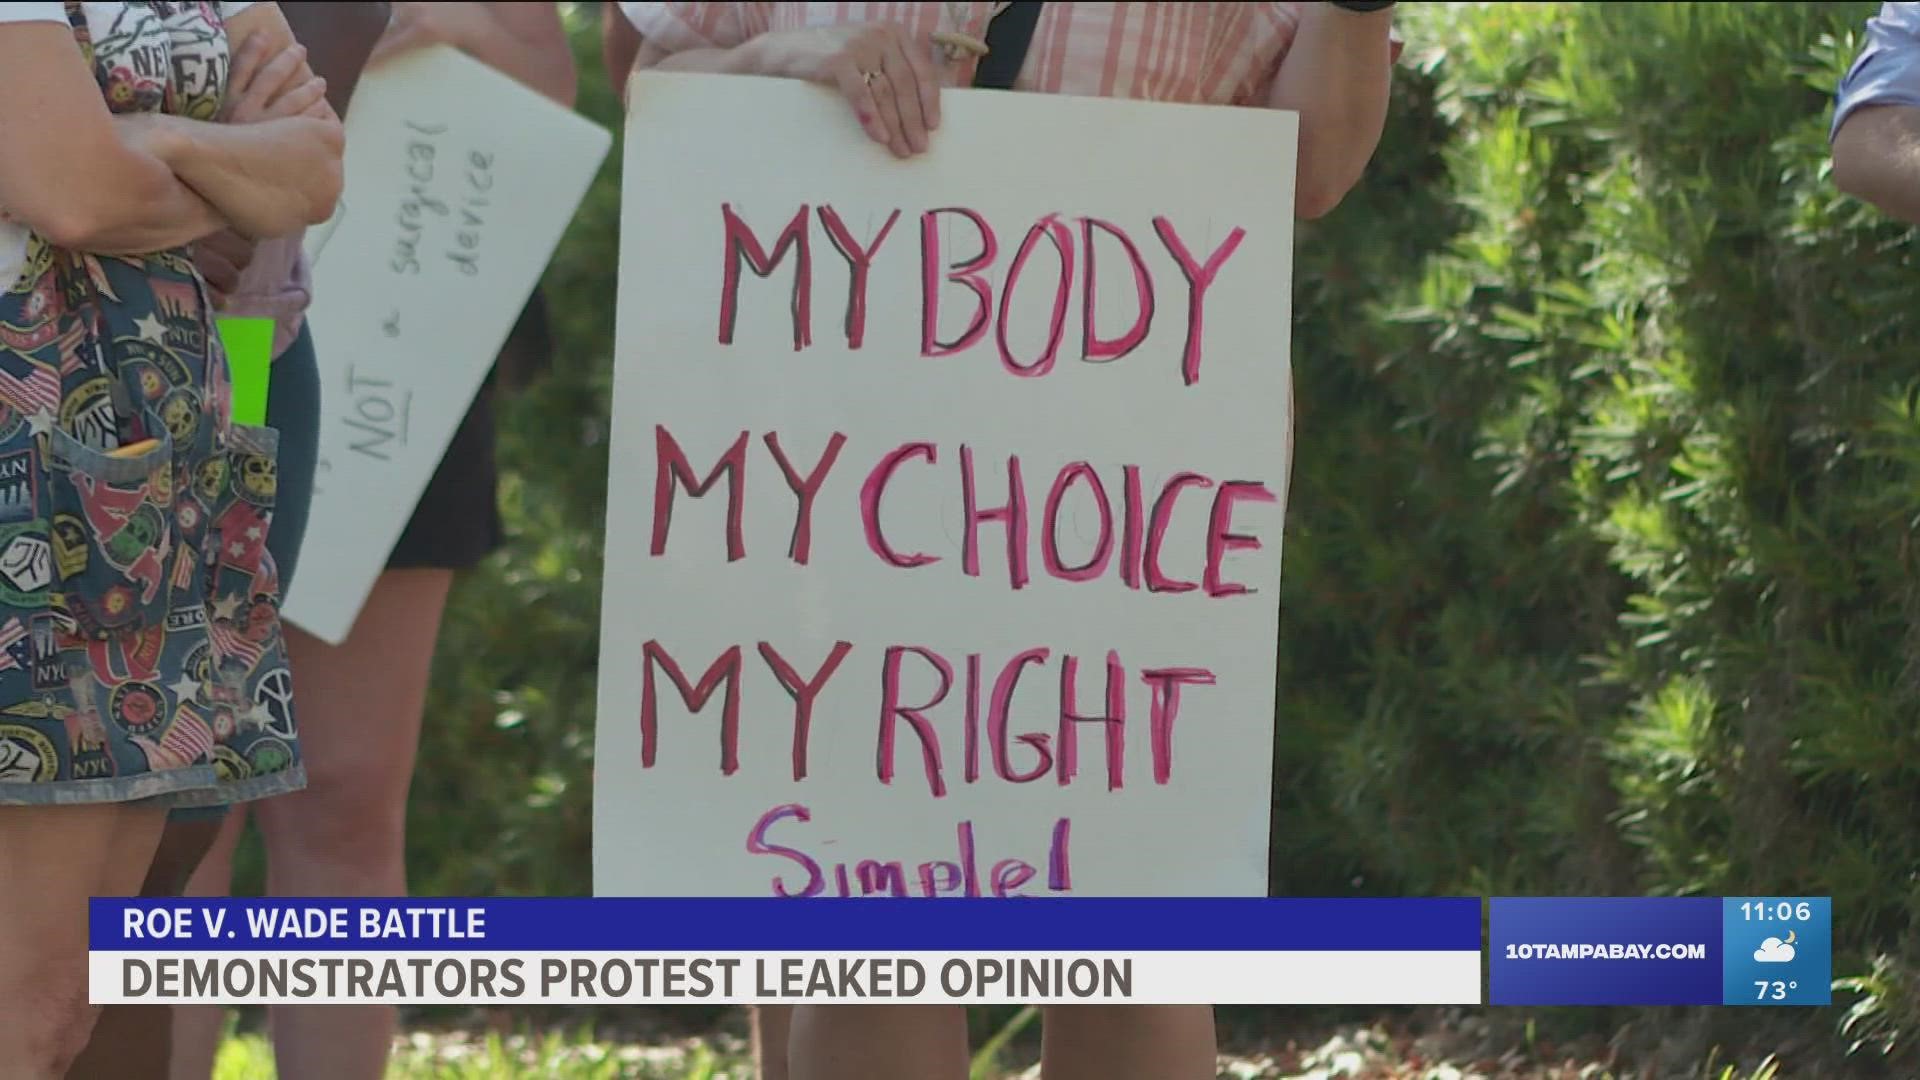 After Politico released a leaked draft opinion that suggested the U.S. Supreme Court was planning to overturn Roe v. Wade, protests began forming around Tampa Bay.